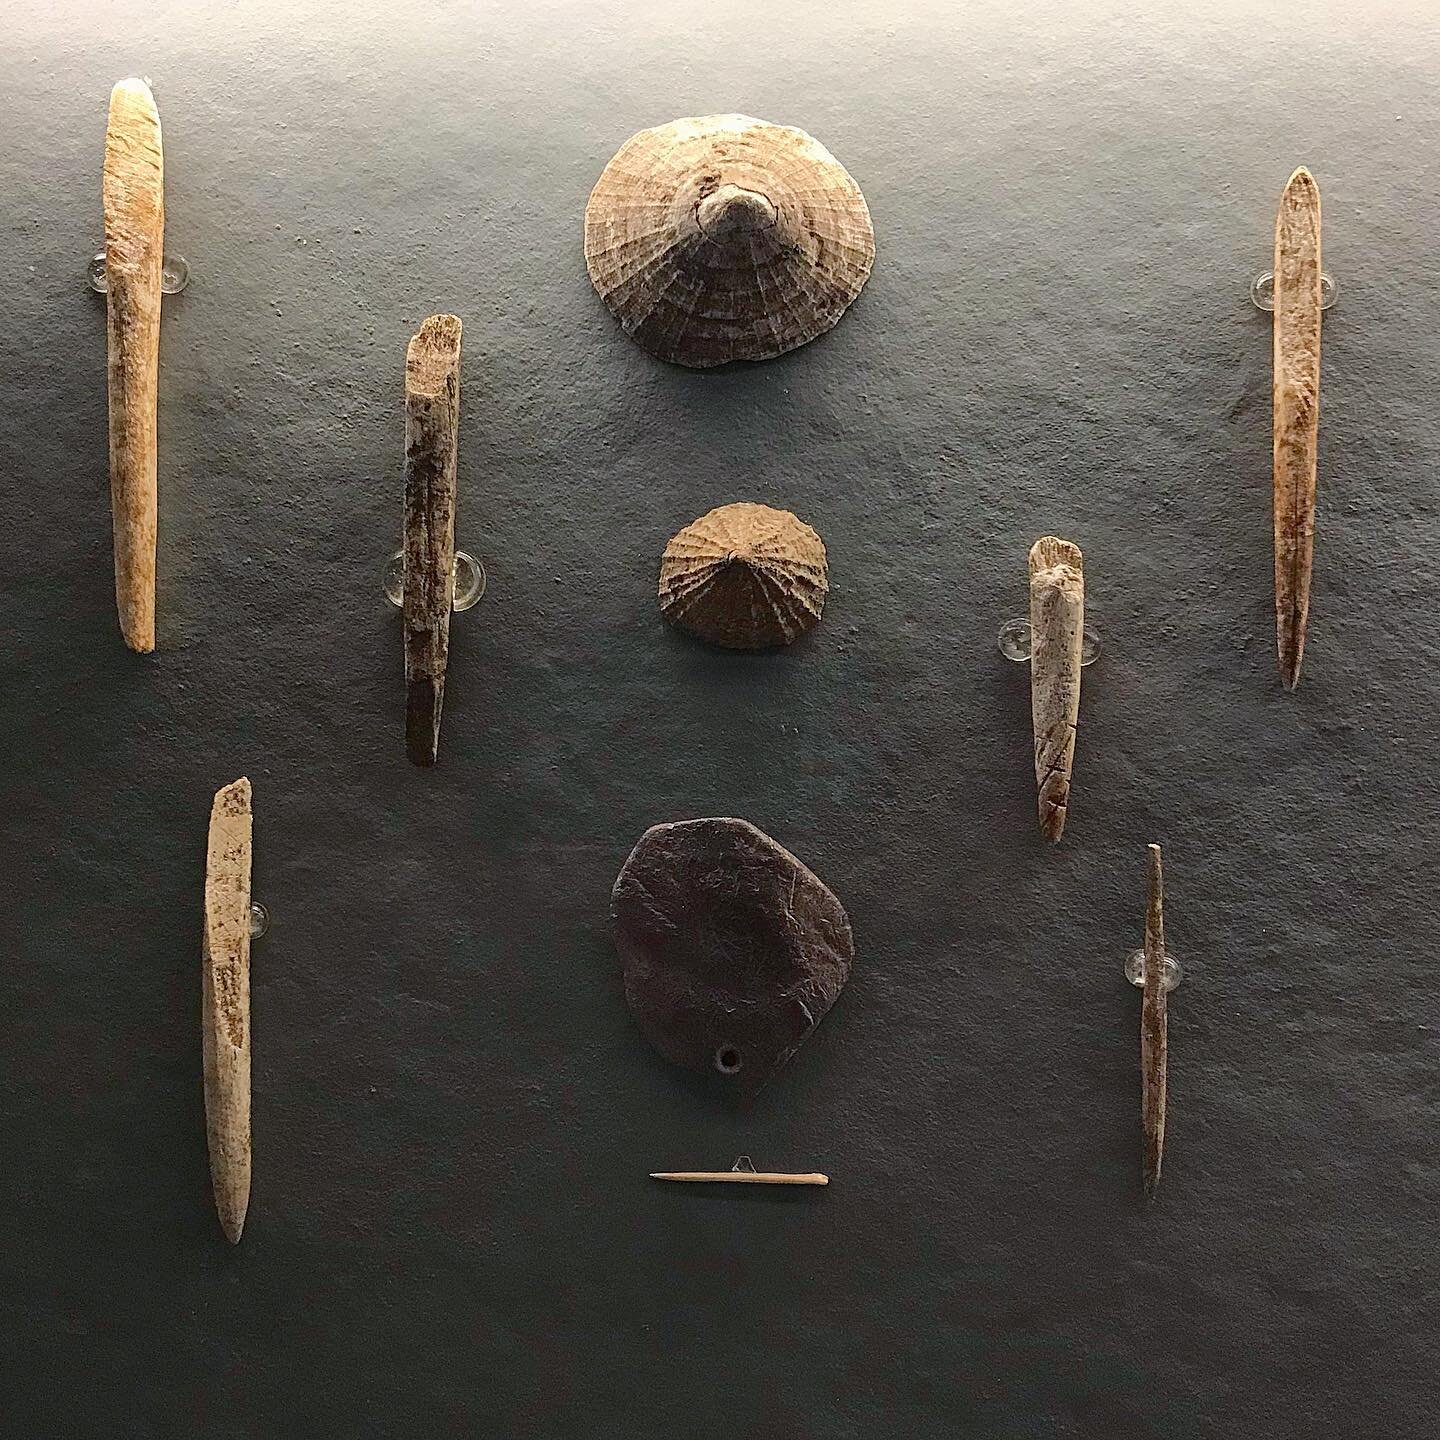 Altamira&rsquo;s Original Finds

More than 140 years later, these various artifacts (limpet shells, bone tool/weapon fragments, a perforated stone) were the nexus for a bold conclusion by a little known Spaniard from Cantabria (then known as the prov